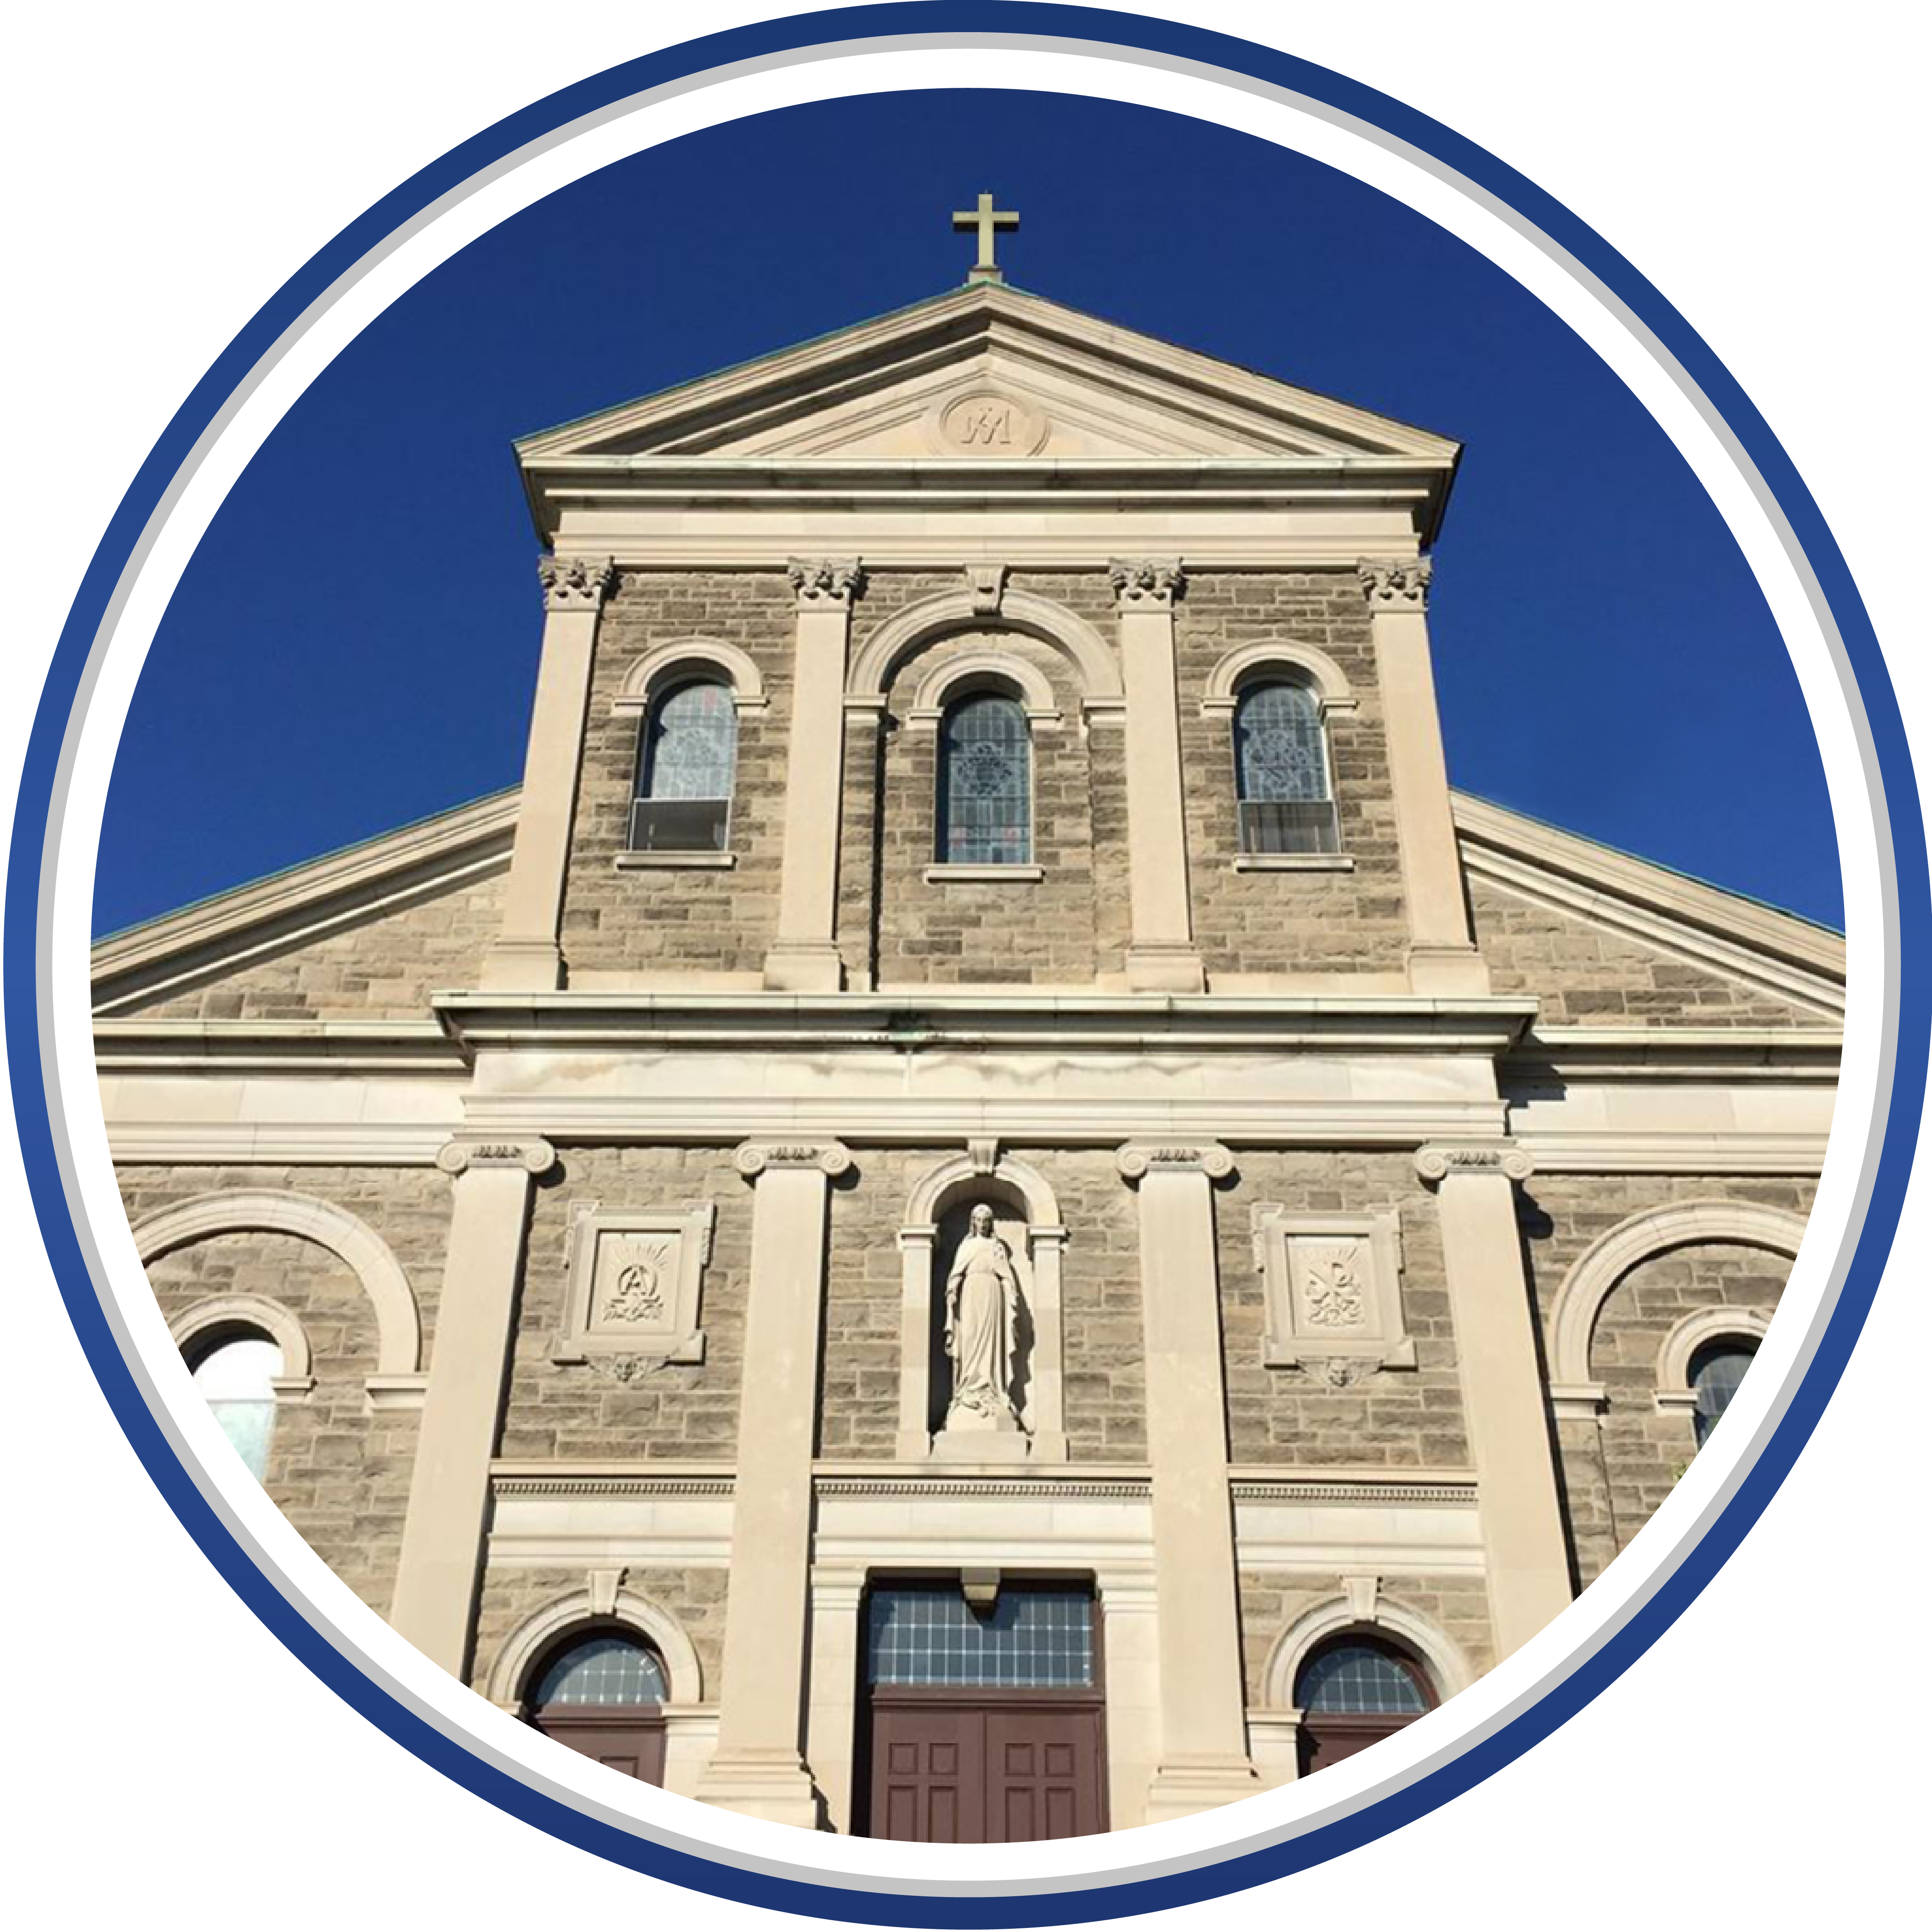 Immaculate Conception Church logo